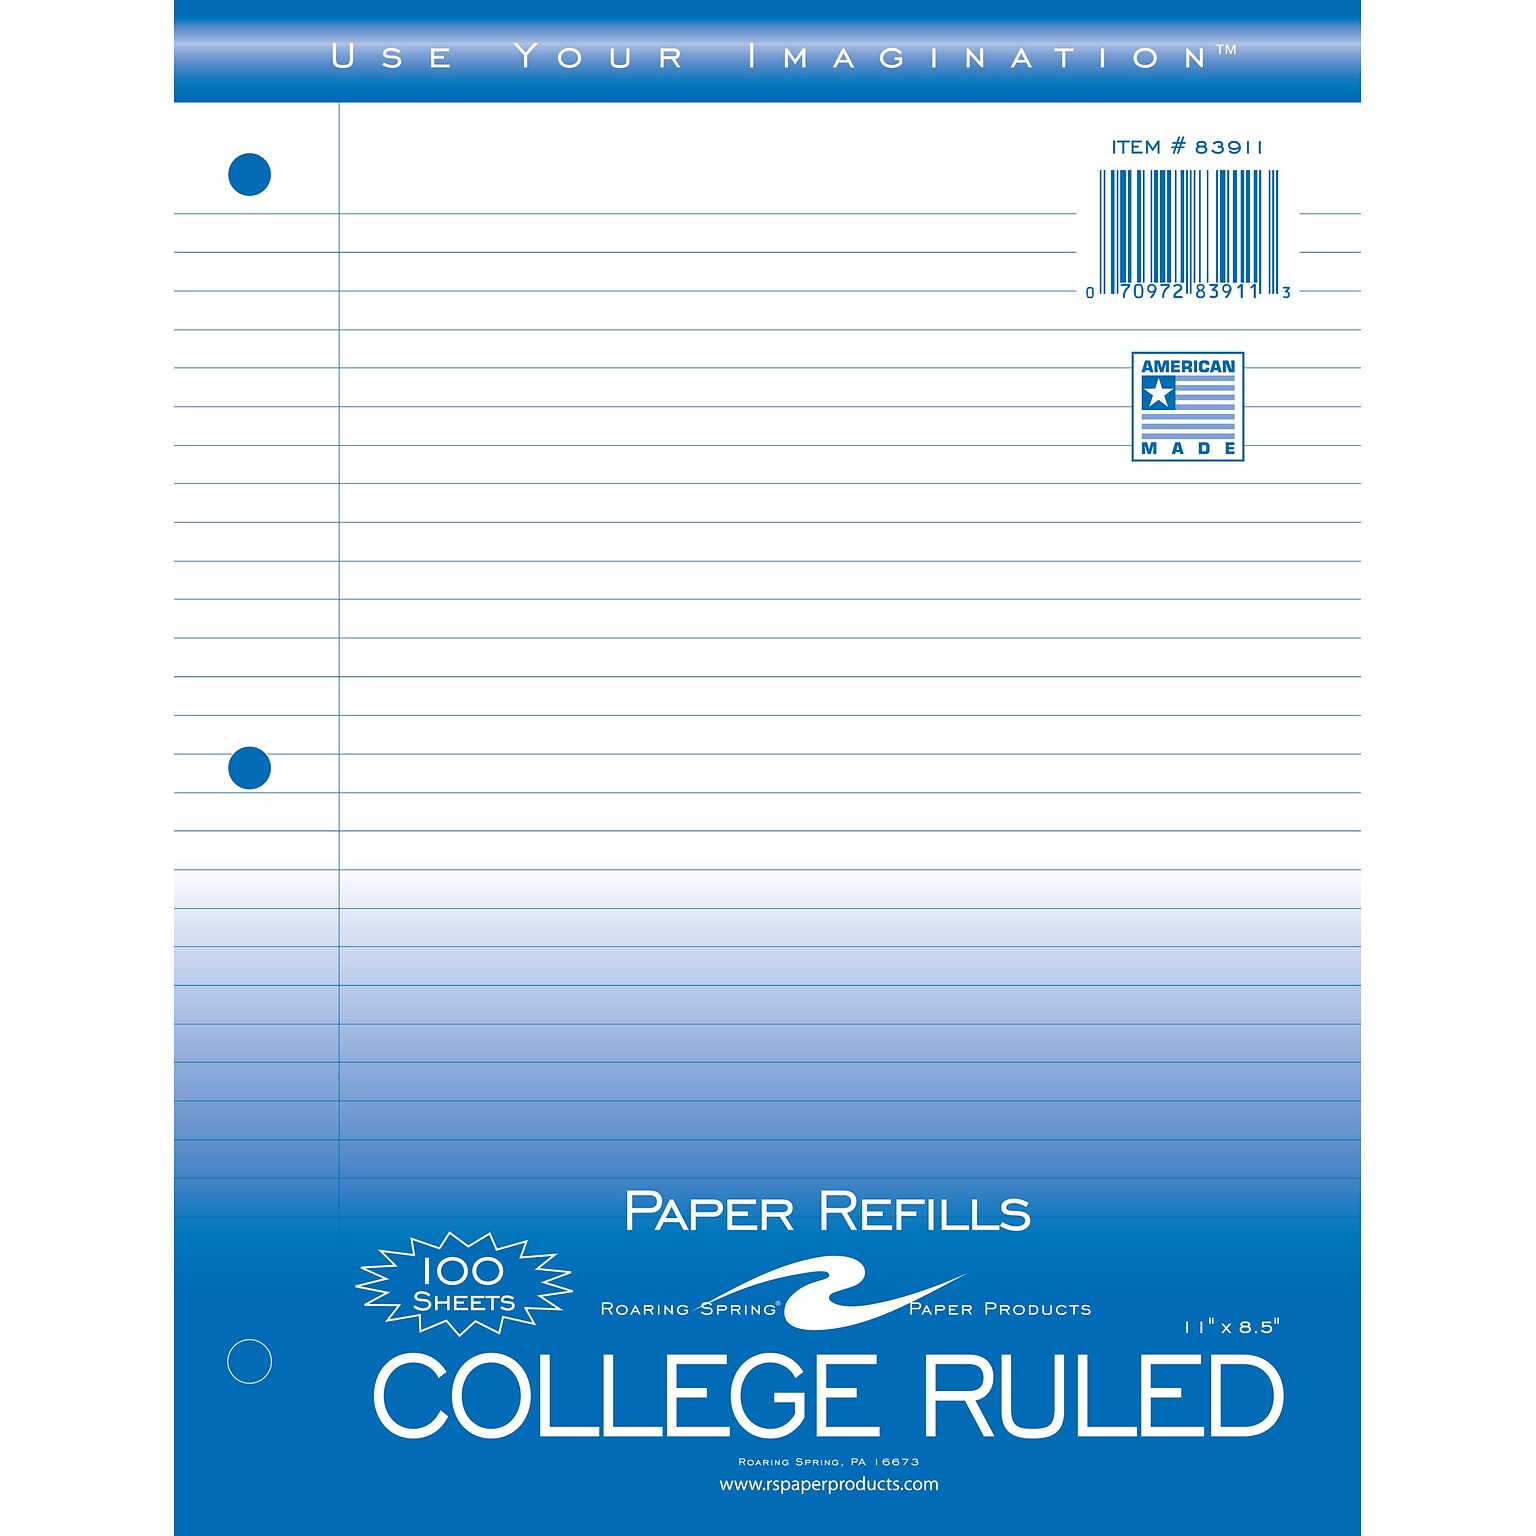 Roaring Spring Paper Products  College Ruled College Ruled Filler Paper, 8.5 x 11, 3-Hole Punched, 100 Sheets/Pack (83911)